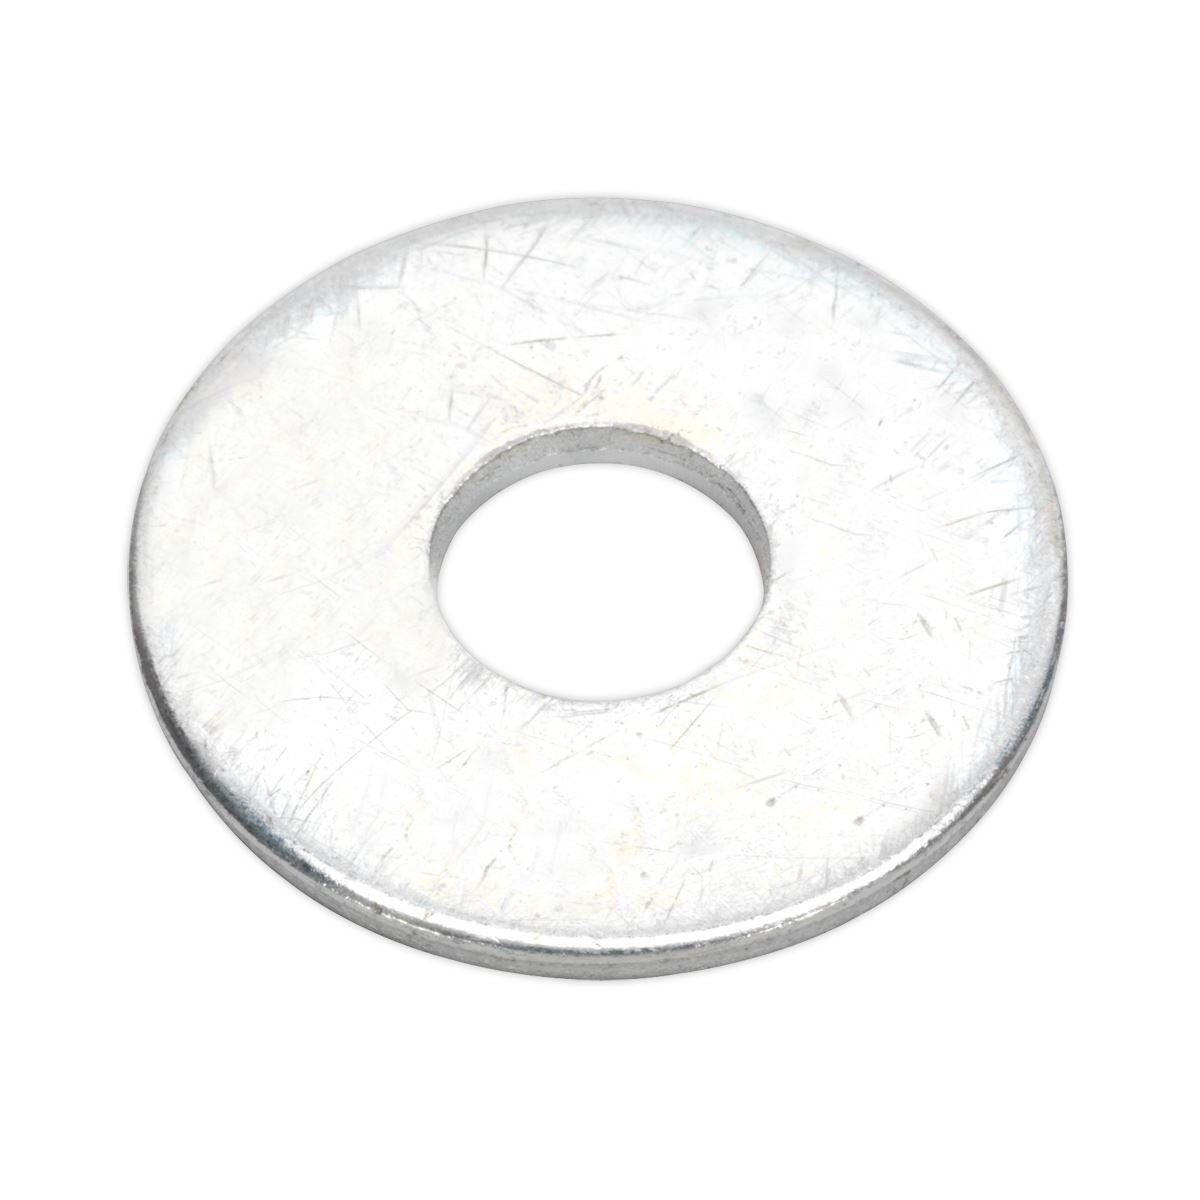 Sealey Repair Washer M8 x 25mm Zinc Plated Pack of 100